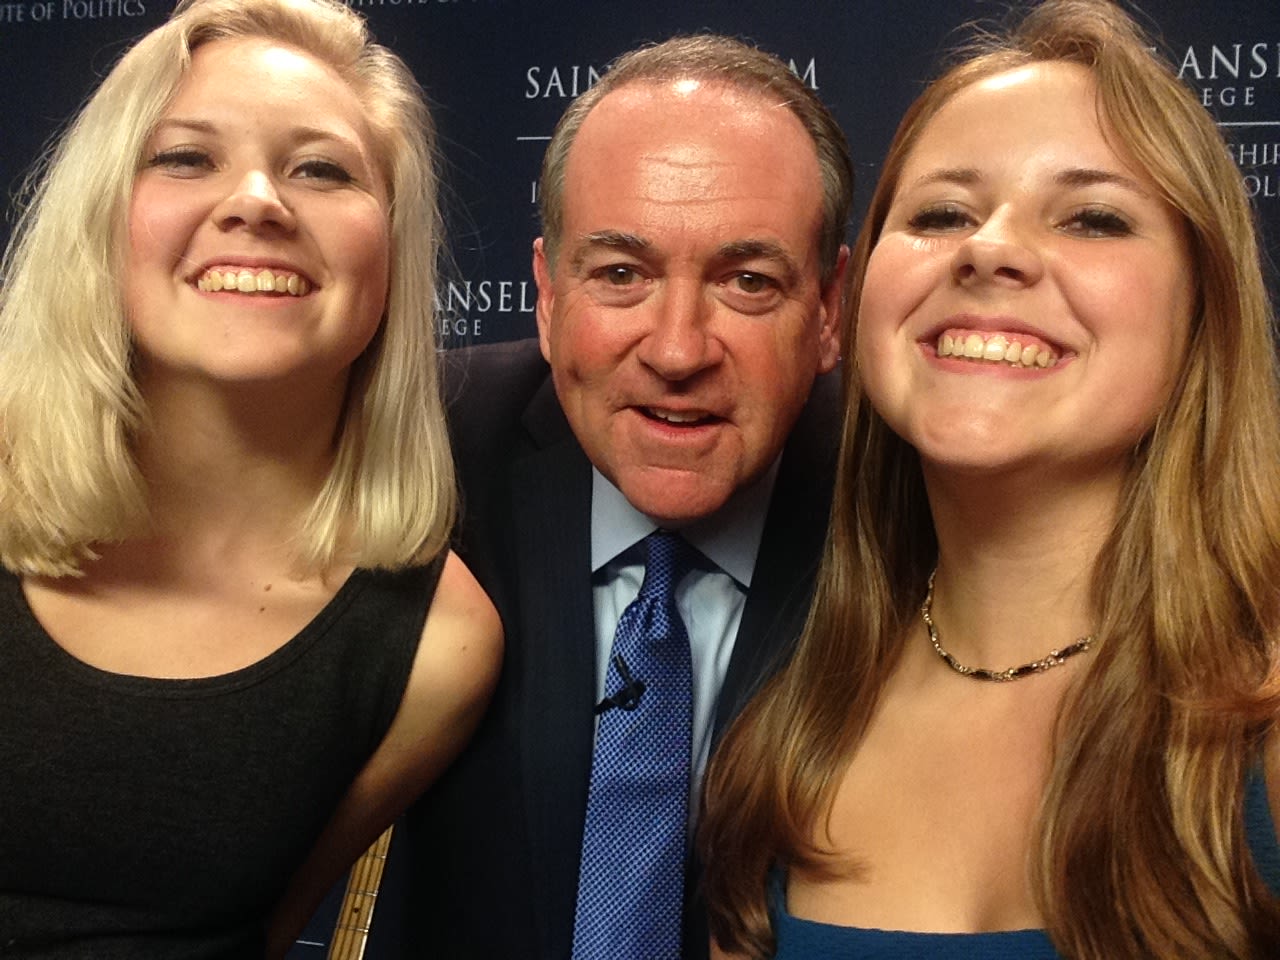 Former Arkansas Gov. Mike Huckabee in Manchester., New Hampshire on October 26. 